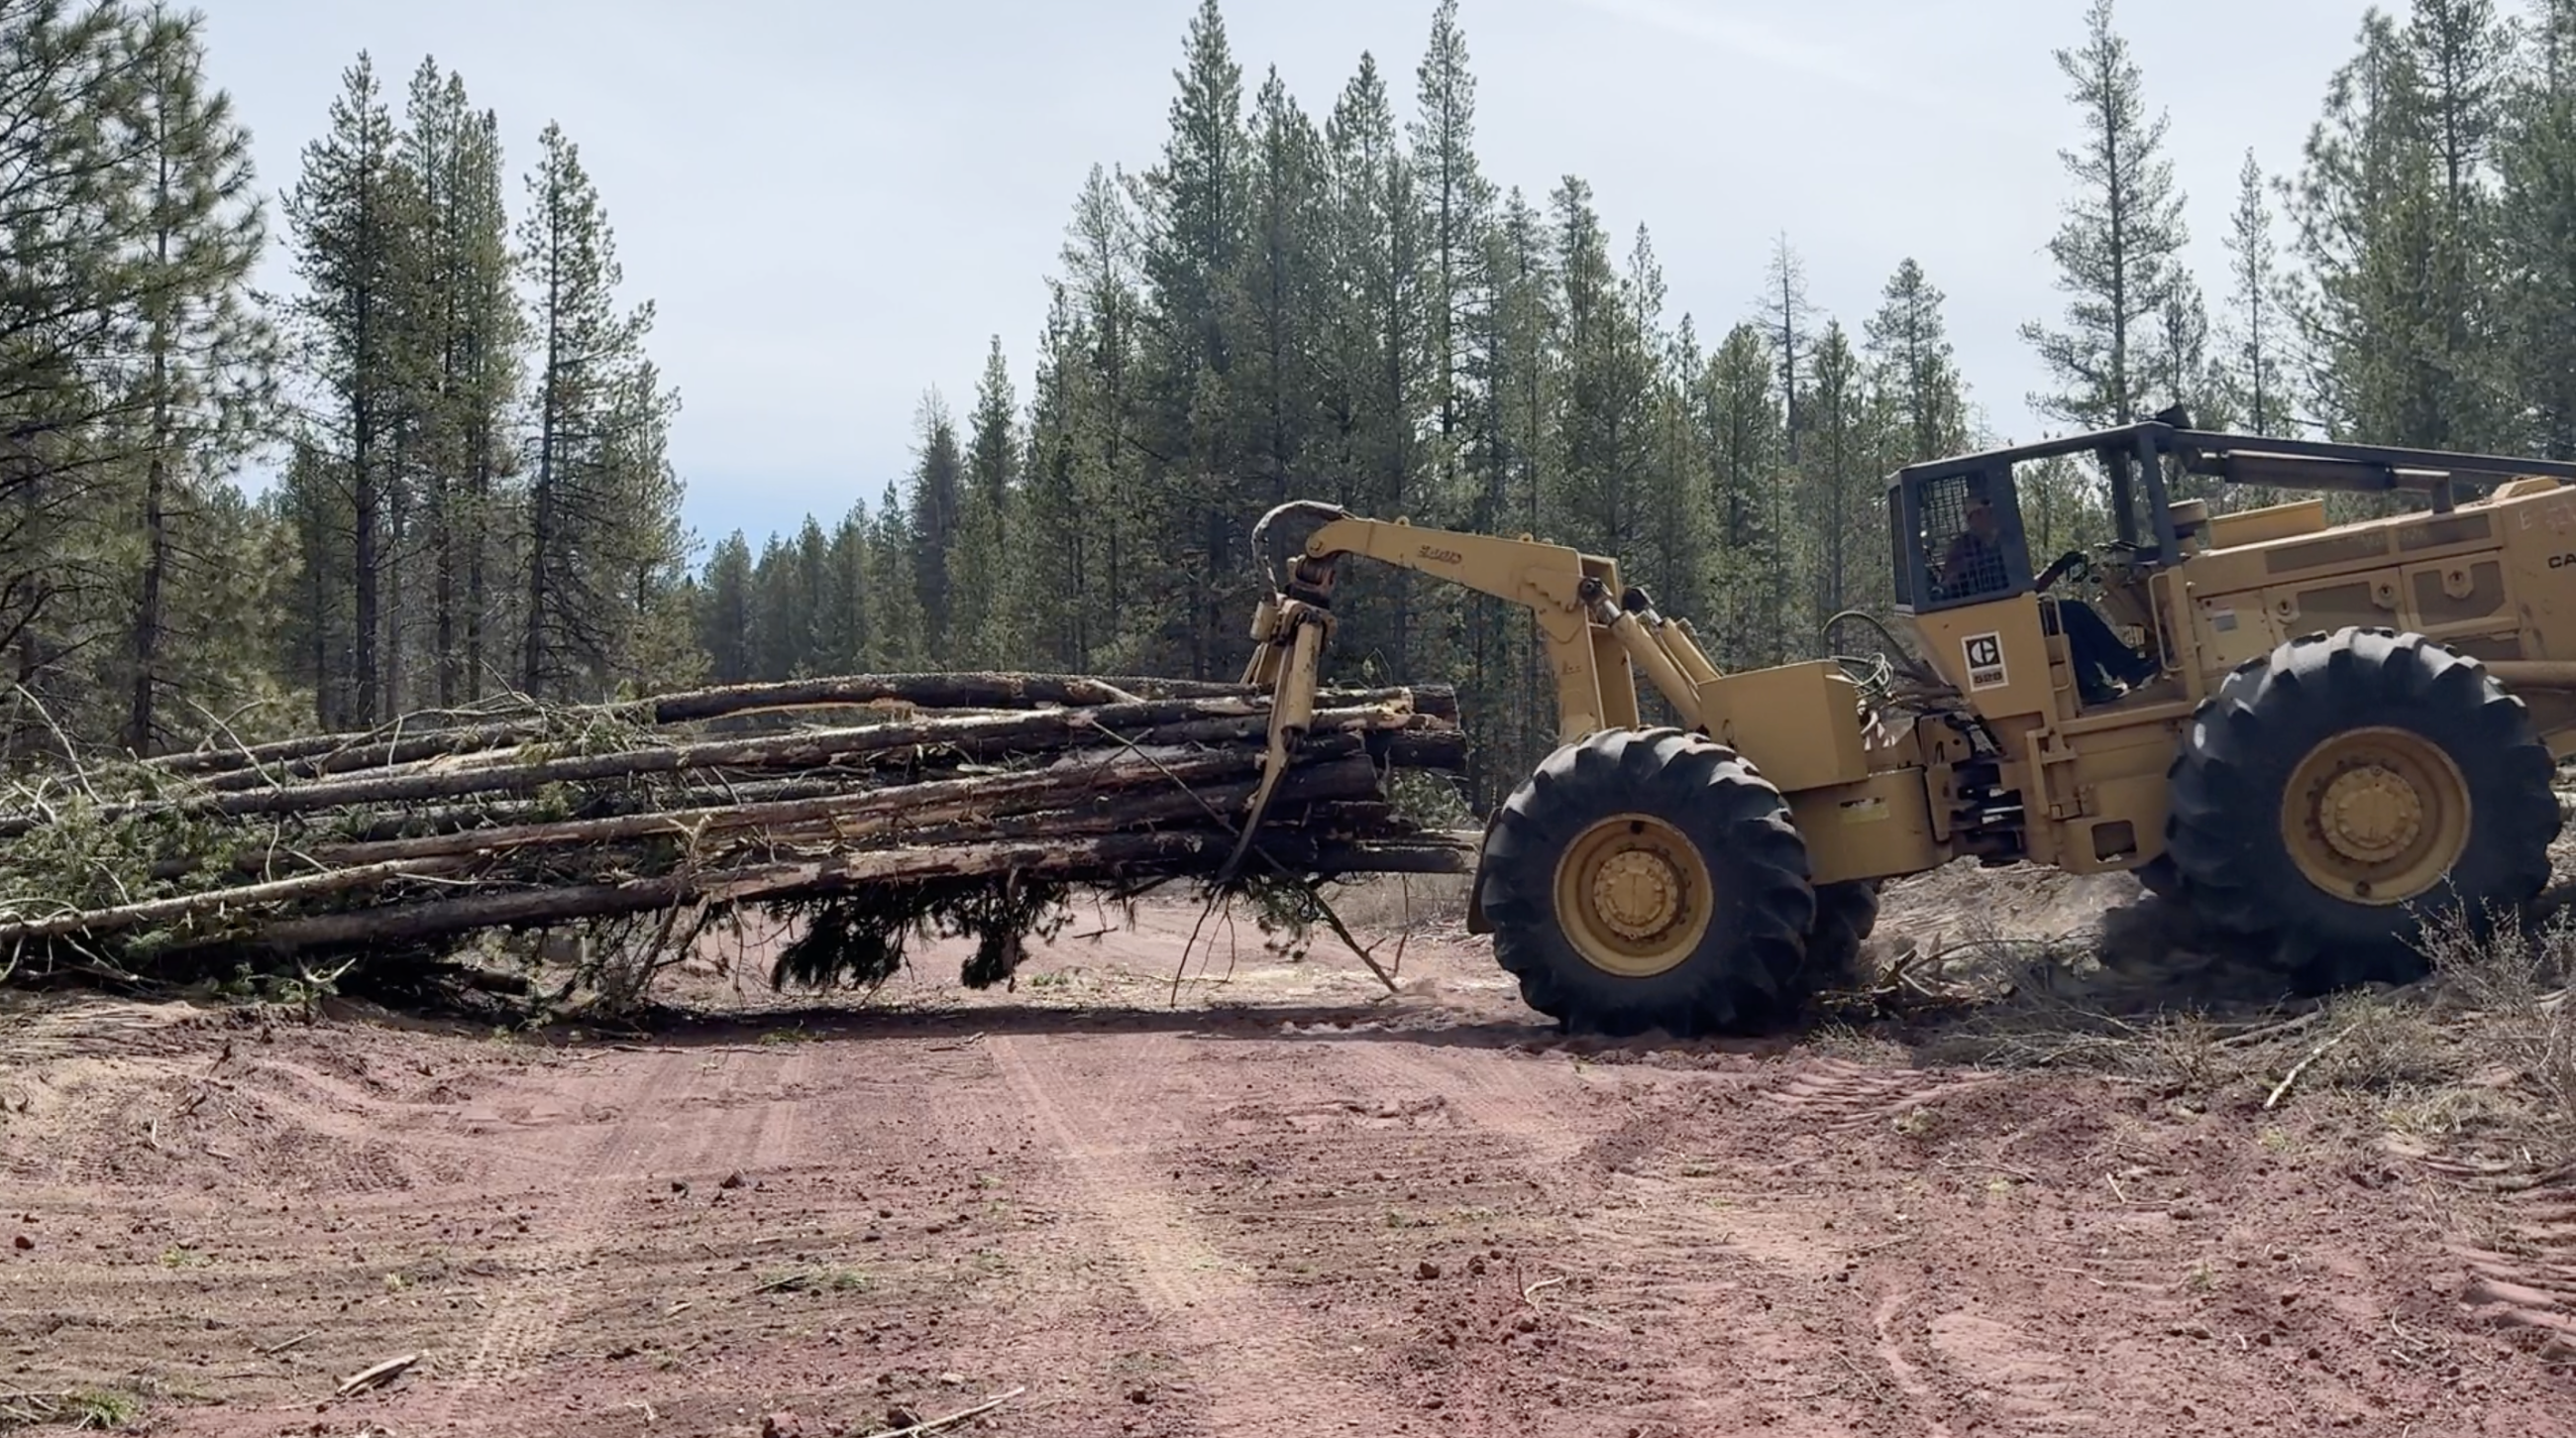 A large yellow skidder moves a bunch of trees across the road